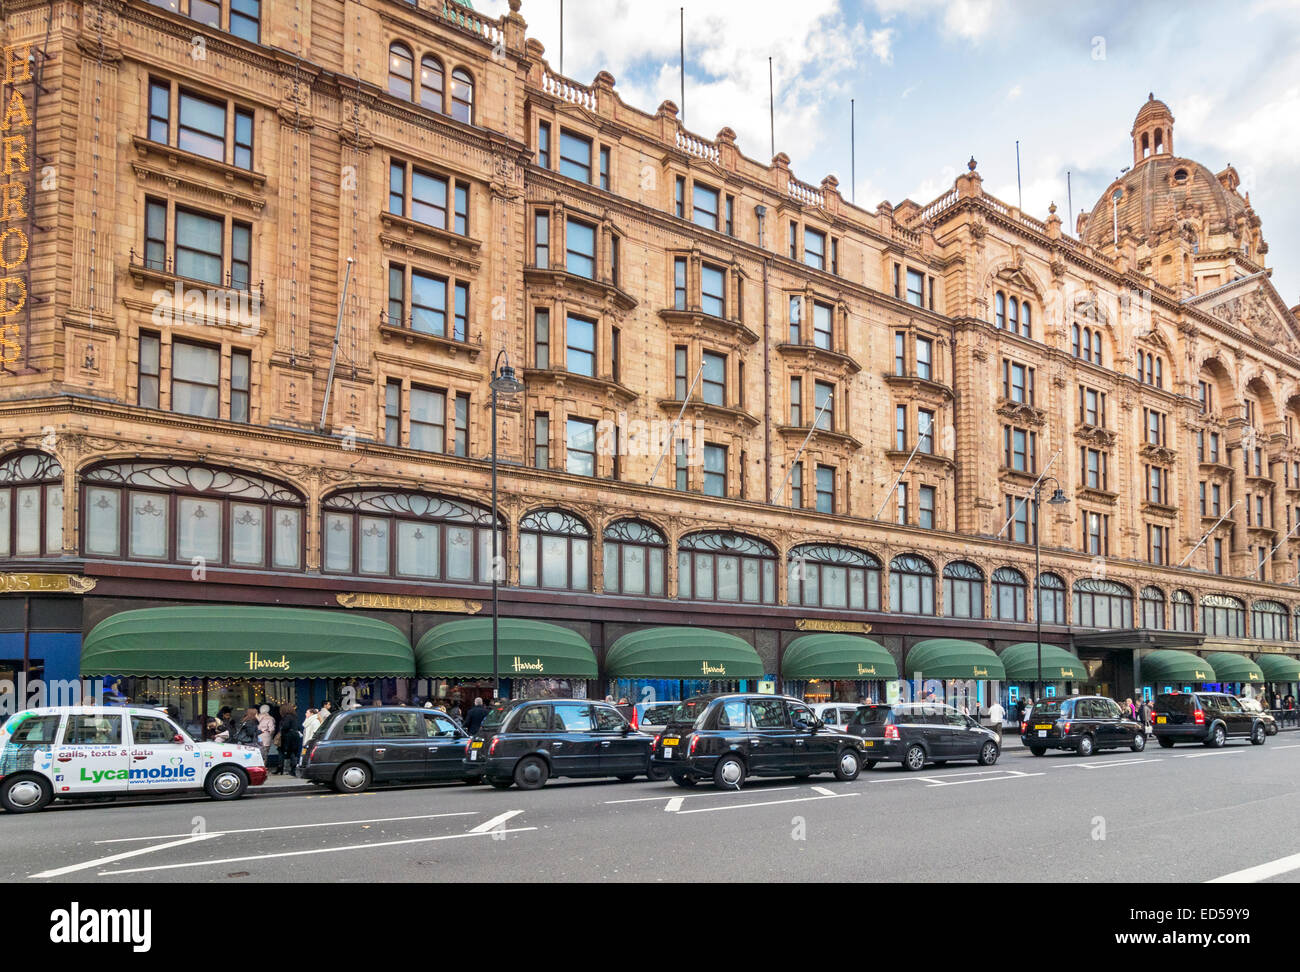 LONDON HARRODS AT CHRISTMAS TIME ROWS OF WAITING TAXIS Stock Photo